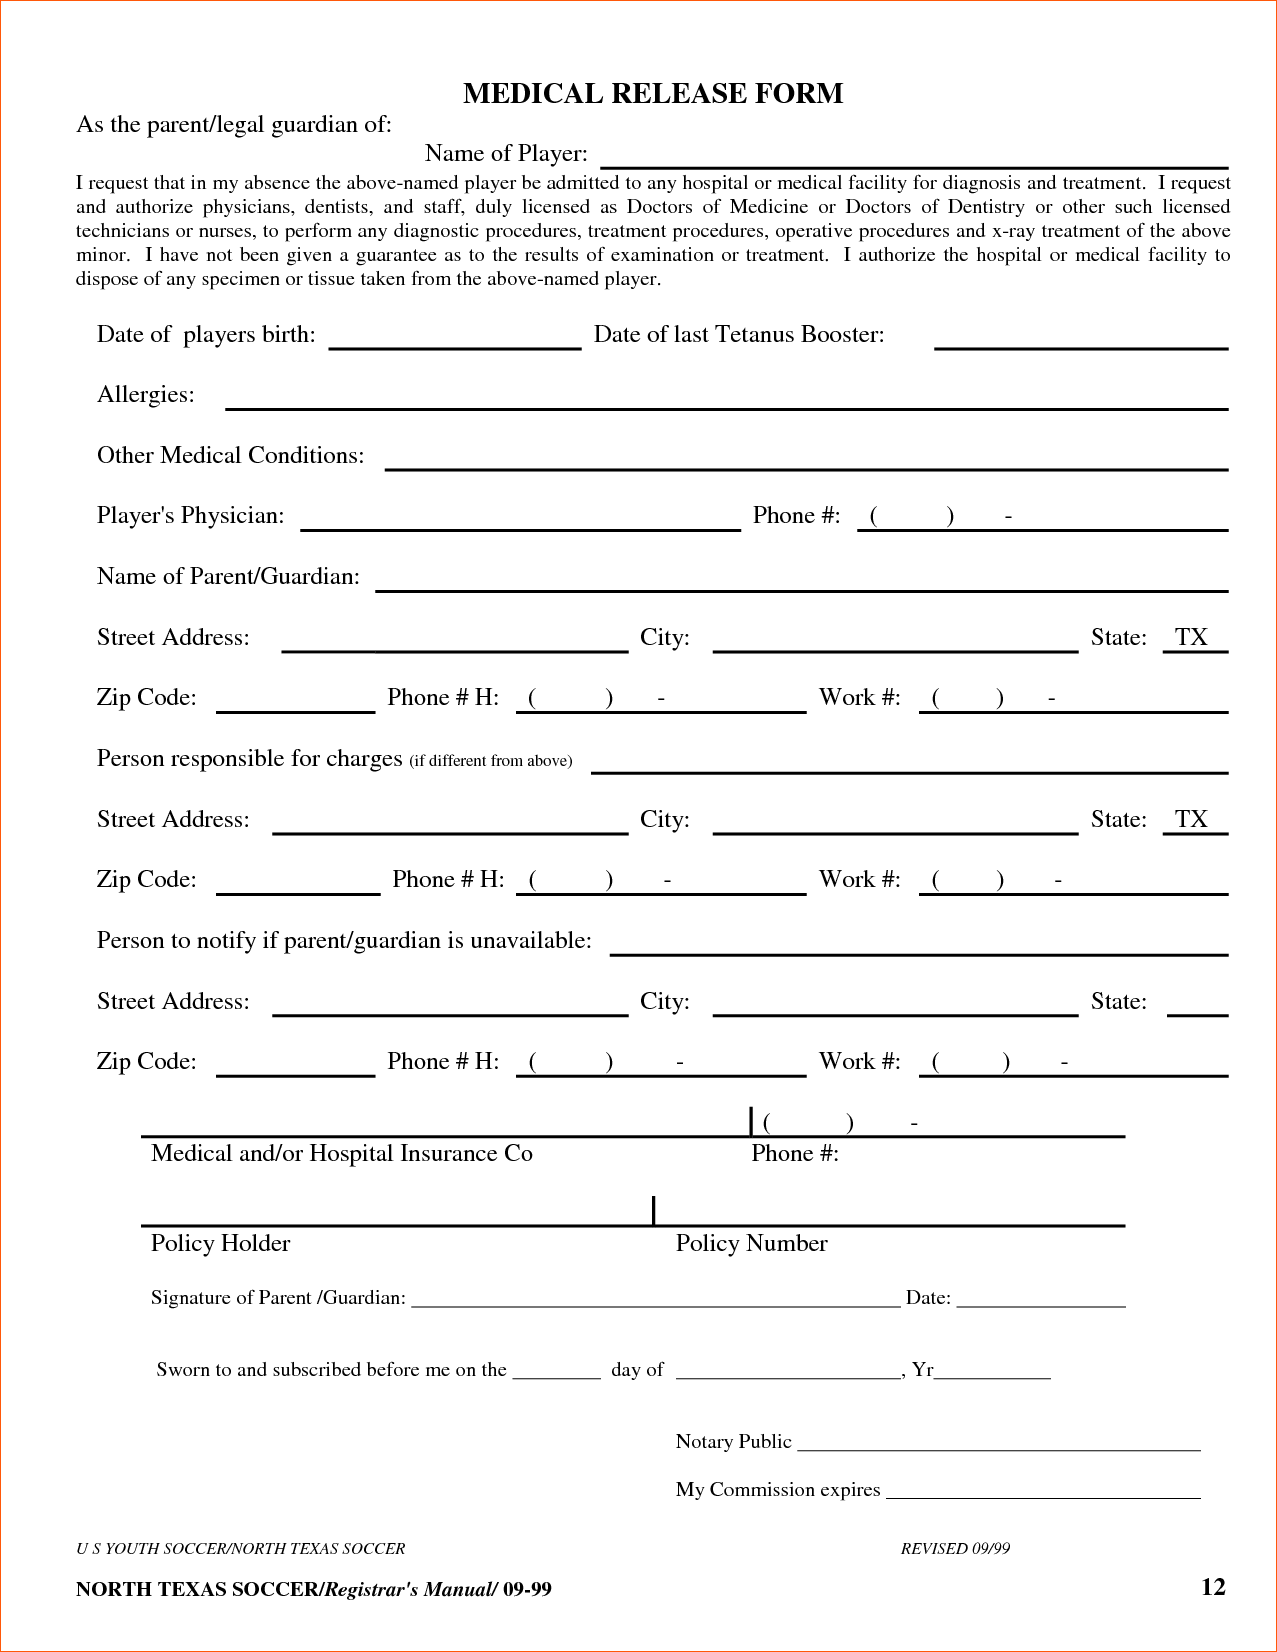 Free Medical Form Templates. best photos of medical release form 